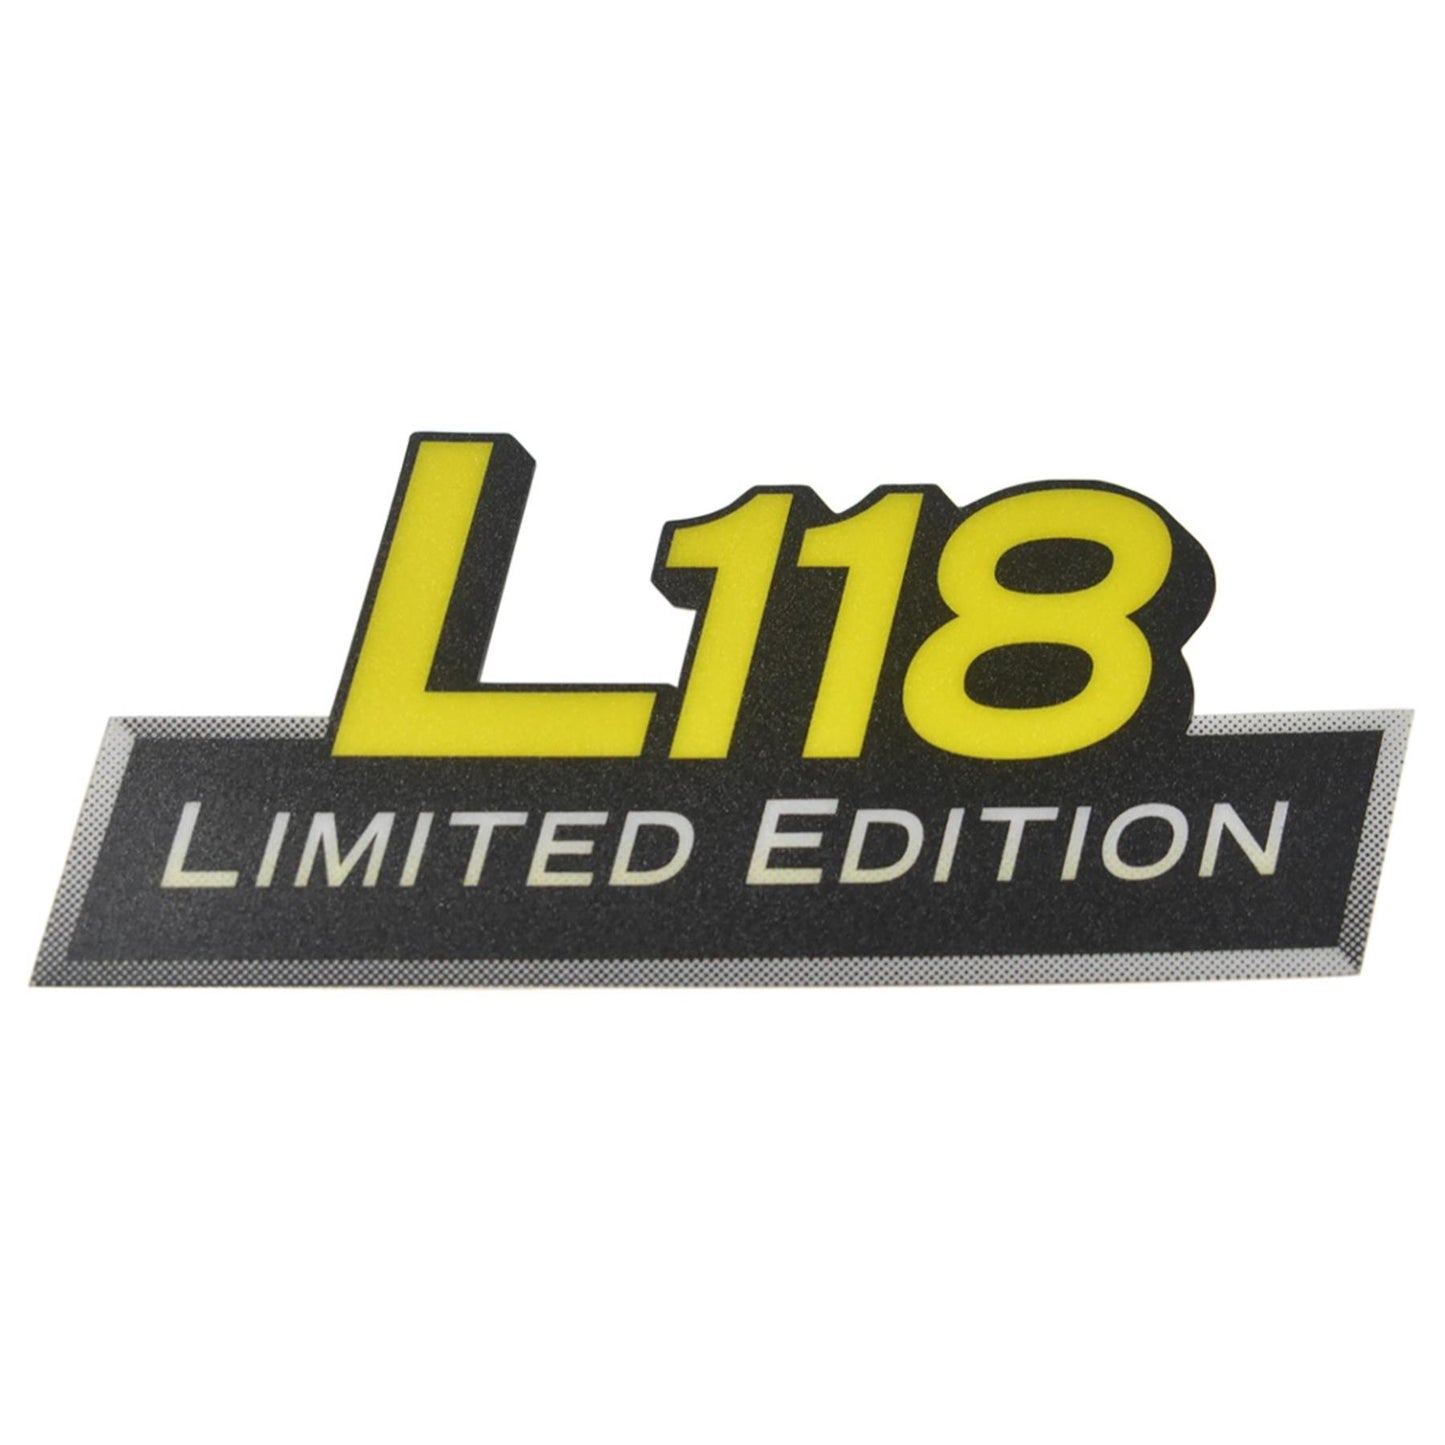 Decal - L118 Limited Edition